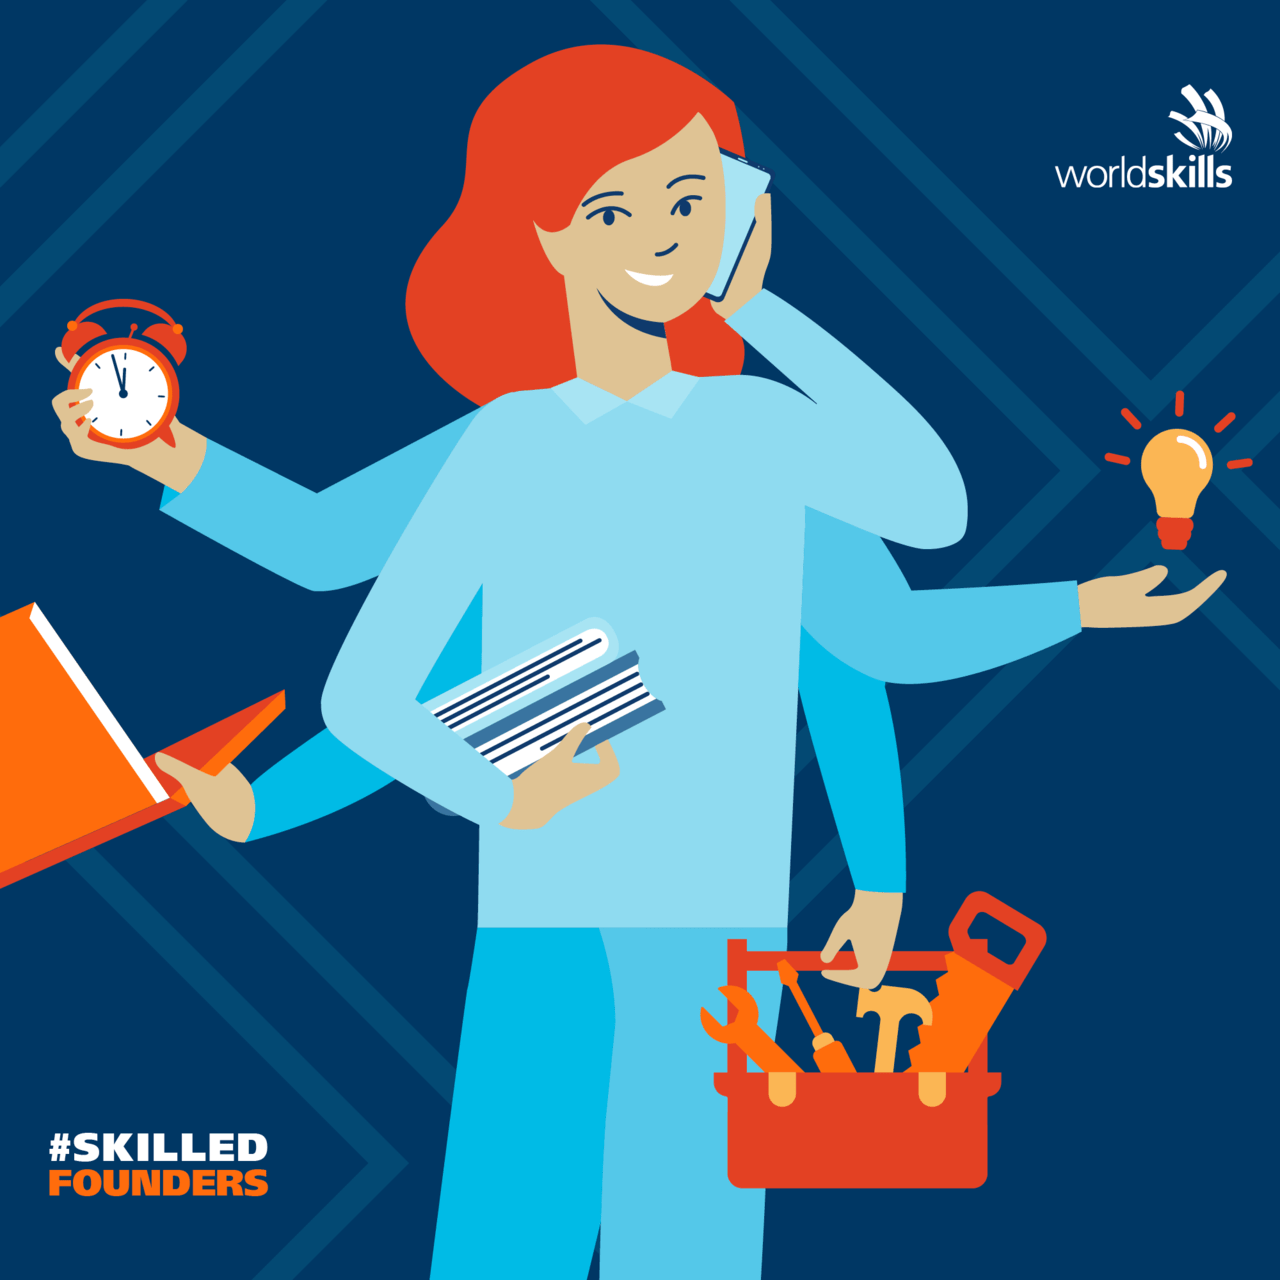 Cartoon animation representing a female entrepreneur for the #SkilledFounders visual identity campaign in May 2021.